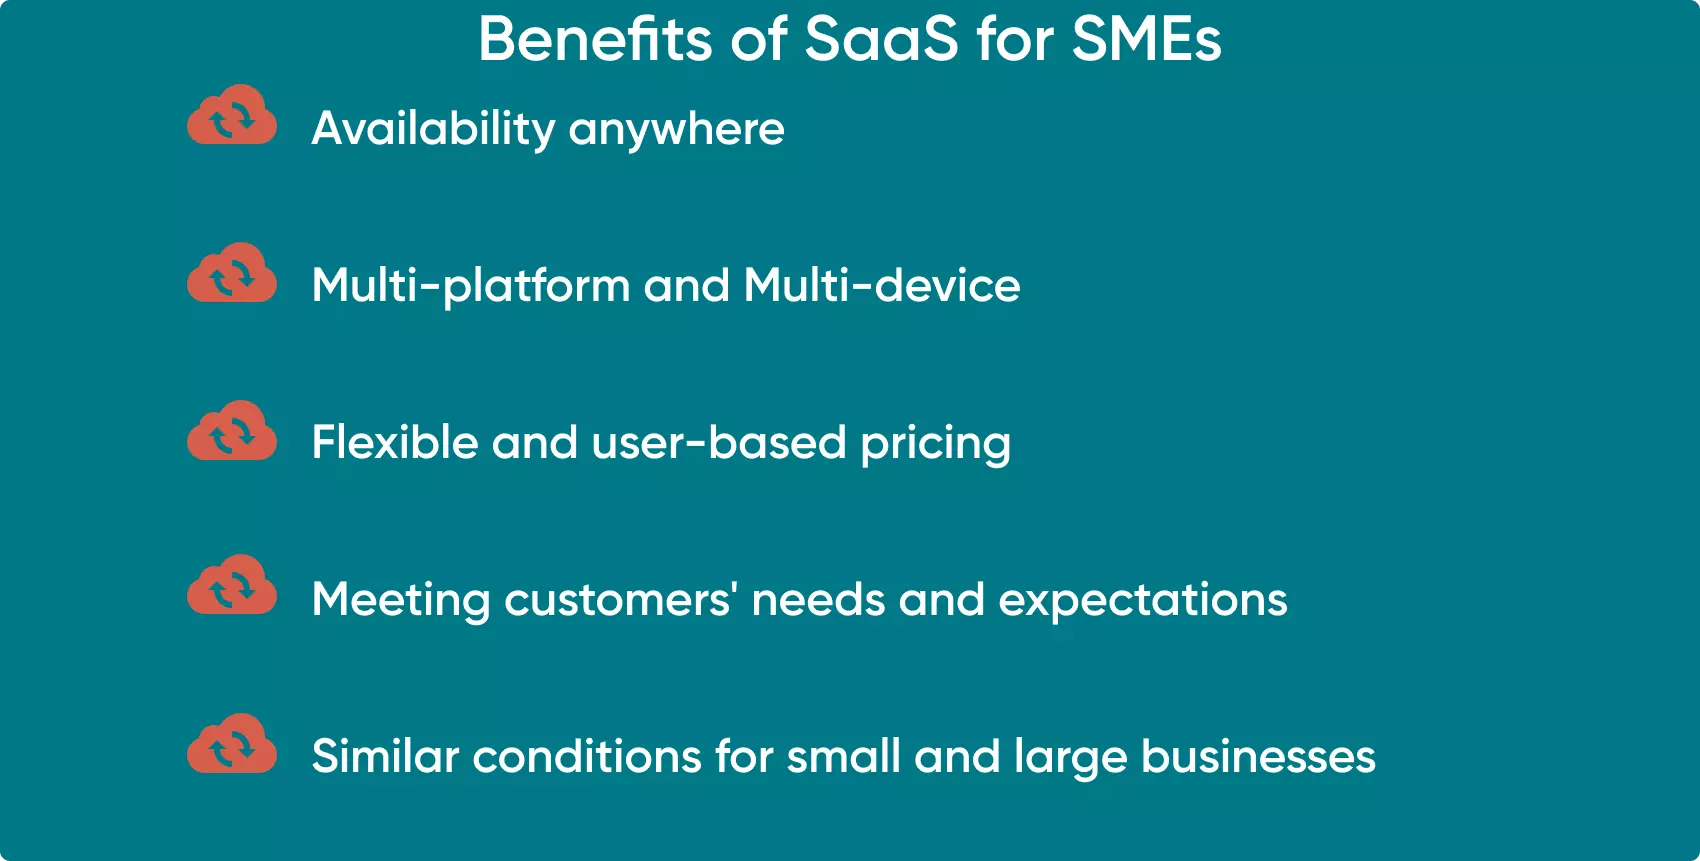 Being a multi-platform and multi-device service, SaaS provides an environment suited for any business. Small and mediun-sized business can benefit from this services specifically as it offers a gateway into the digital side of modern business.